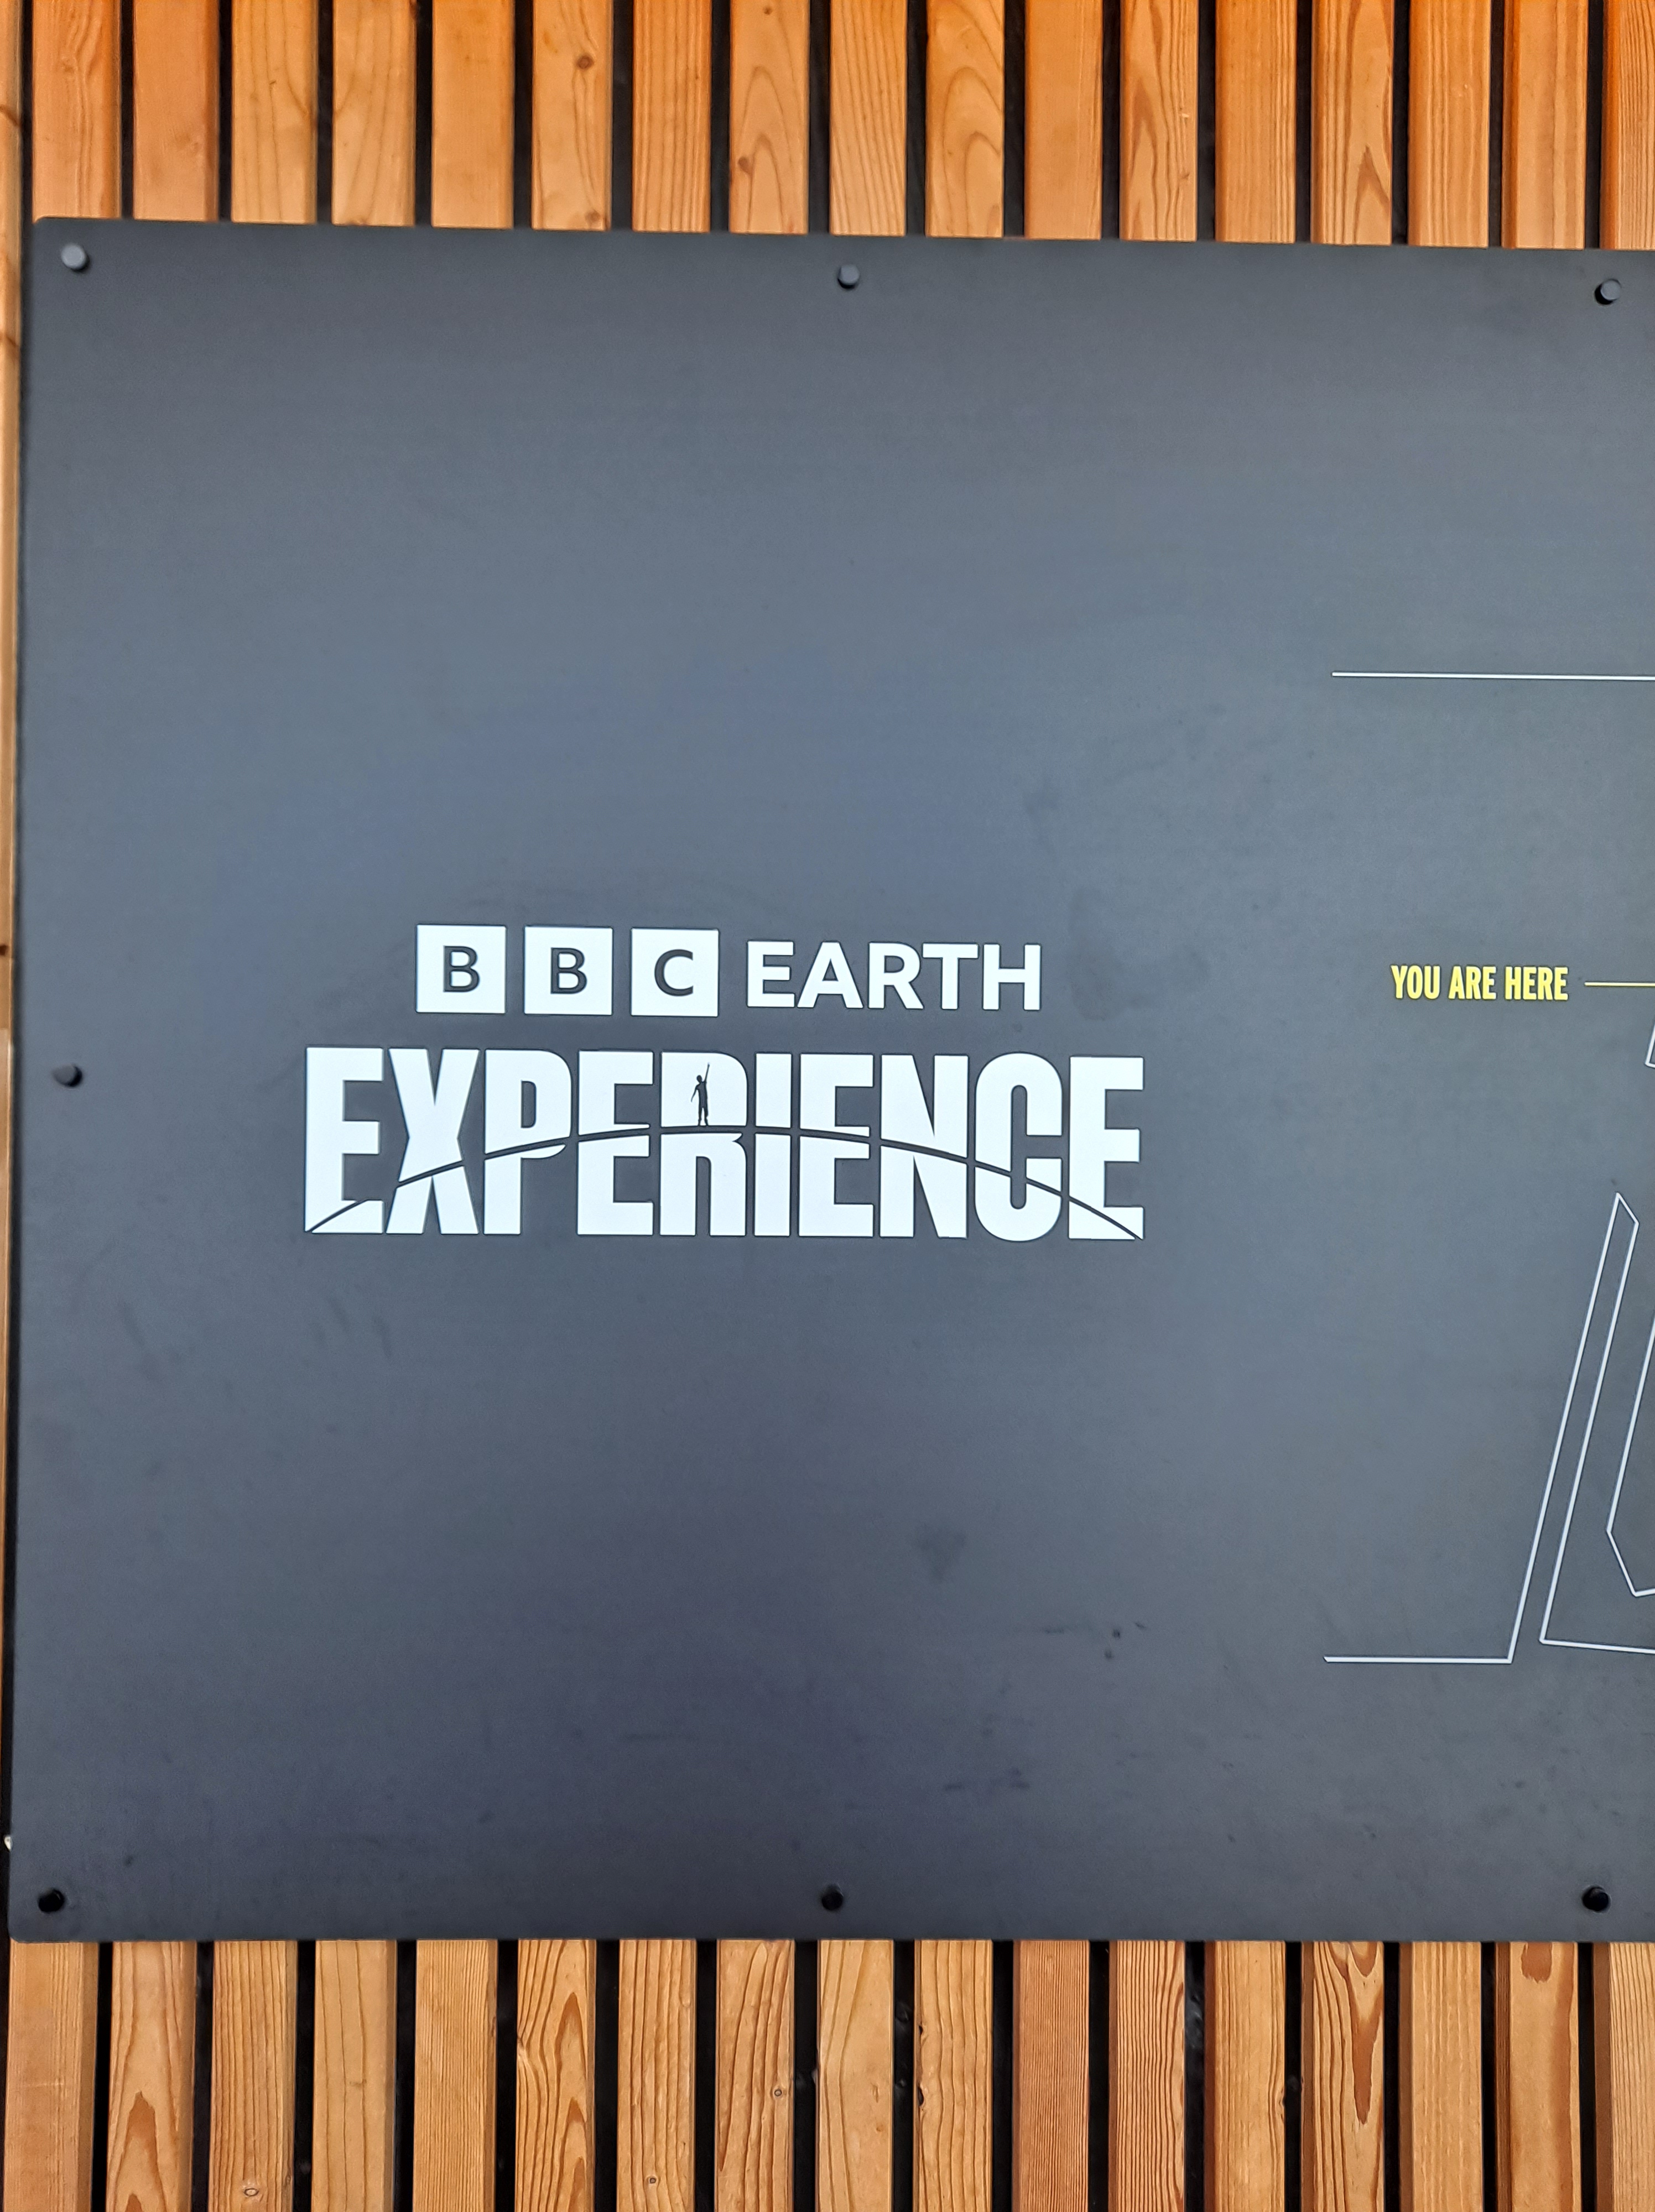 the BBC Earth Experience